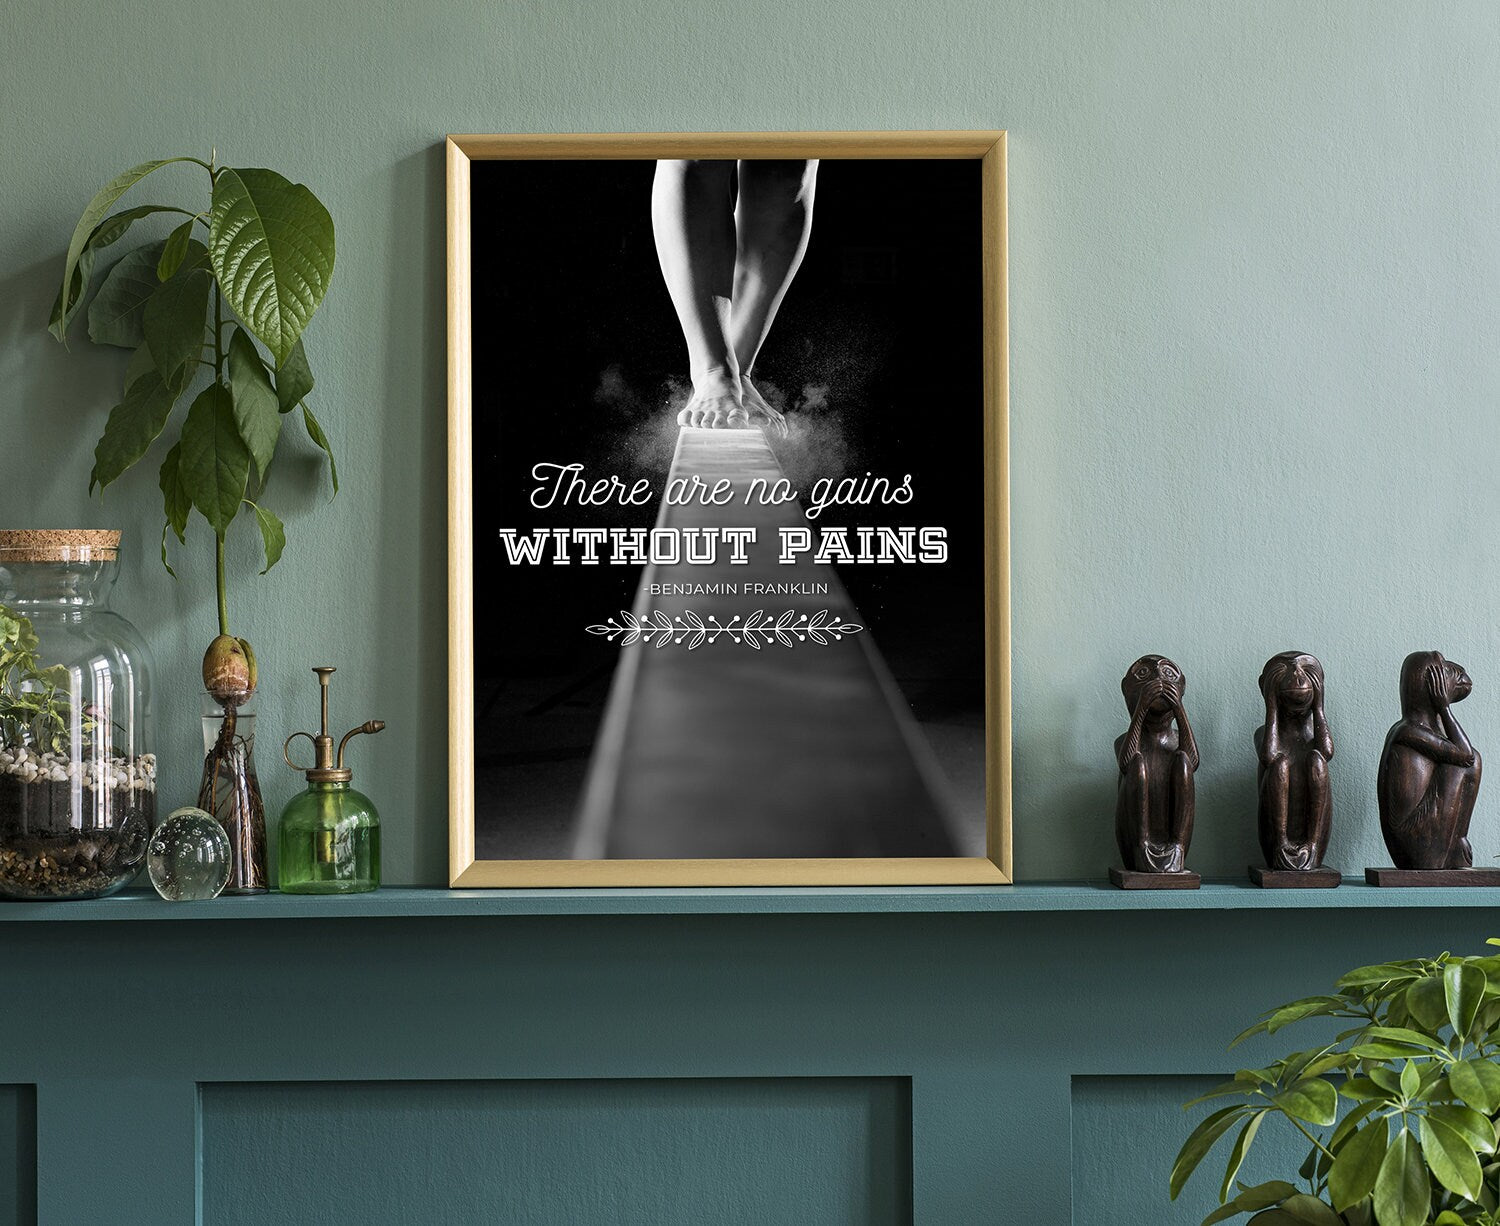 Gym wall art, Gym Poster, Gym quote, Gym Decor, Home gym, Home gym decor, Home gym poster, Benjamin Franklin, Fitness art,Motivational quote